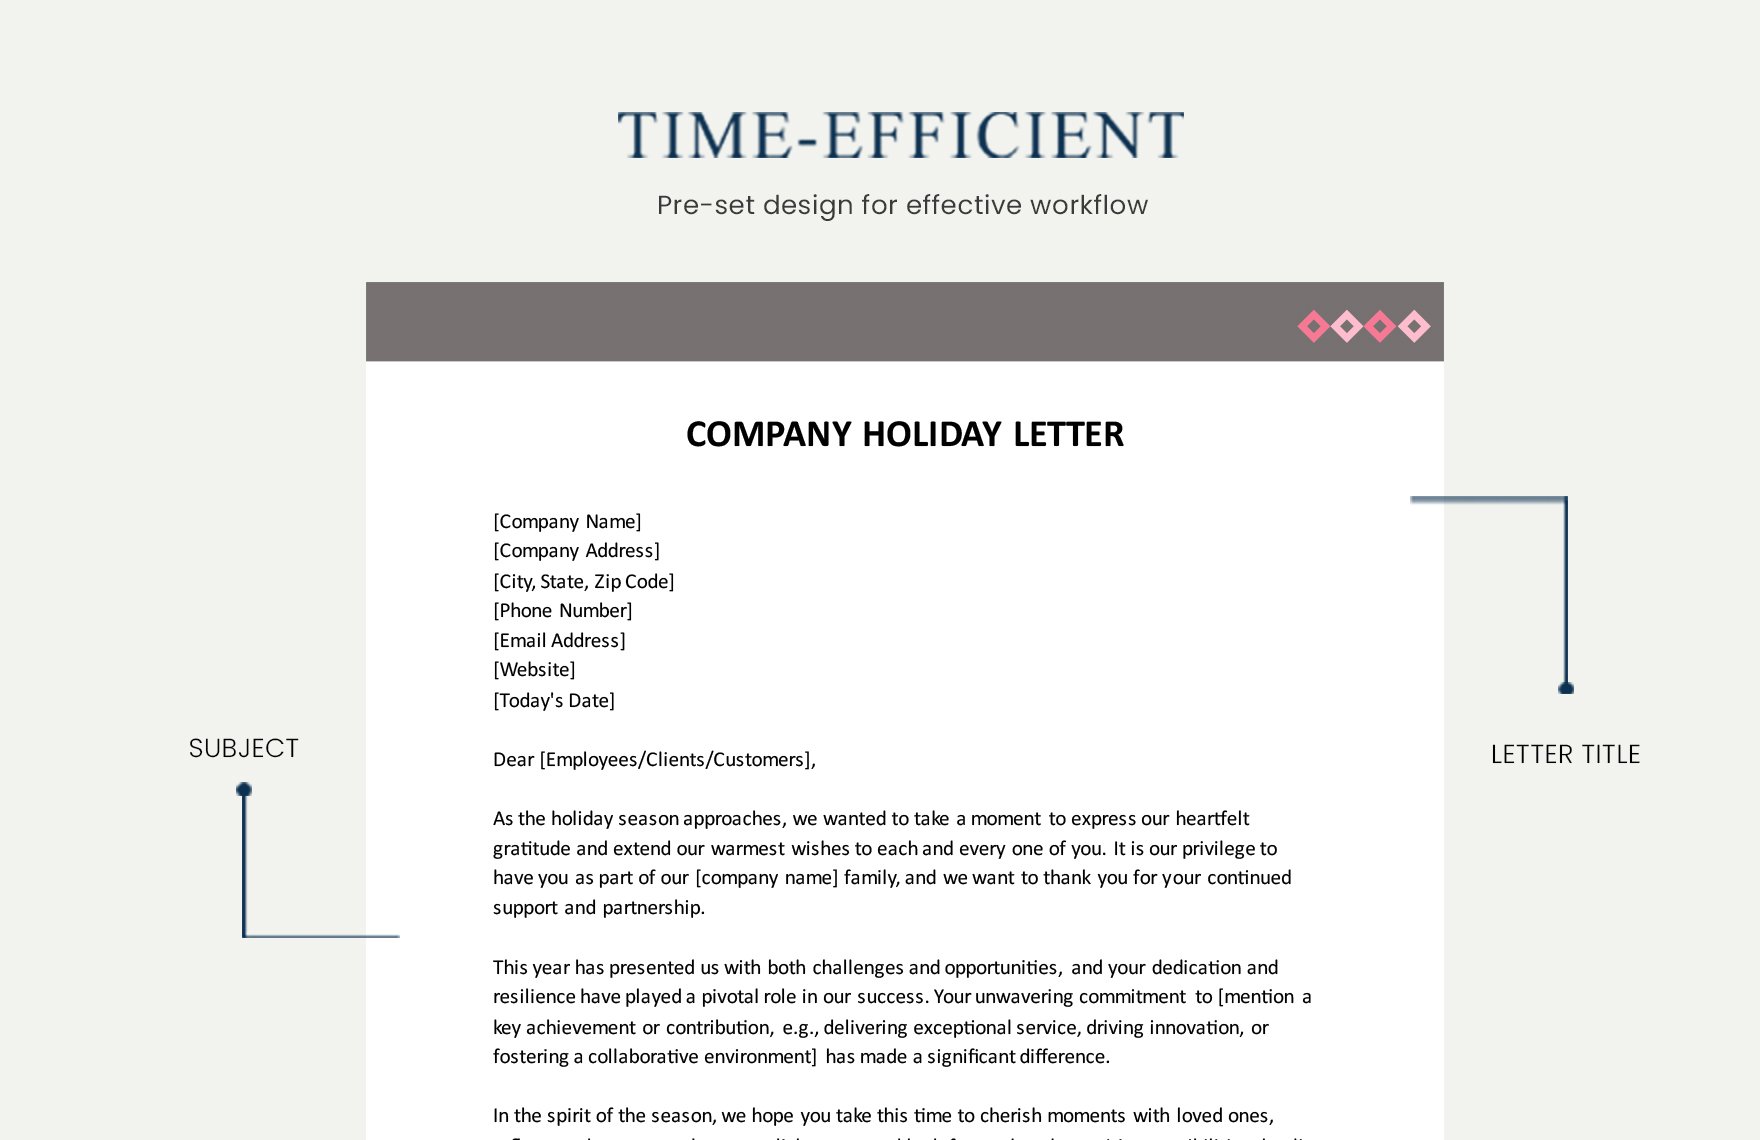 Company Holiday Letter